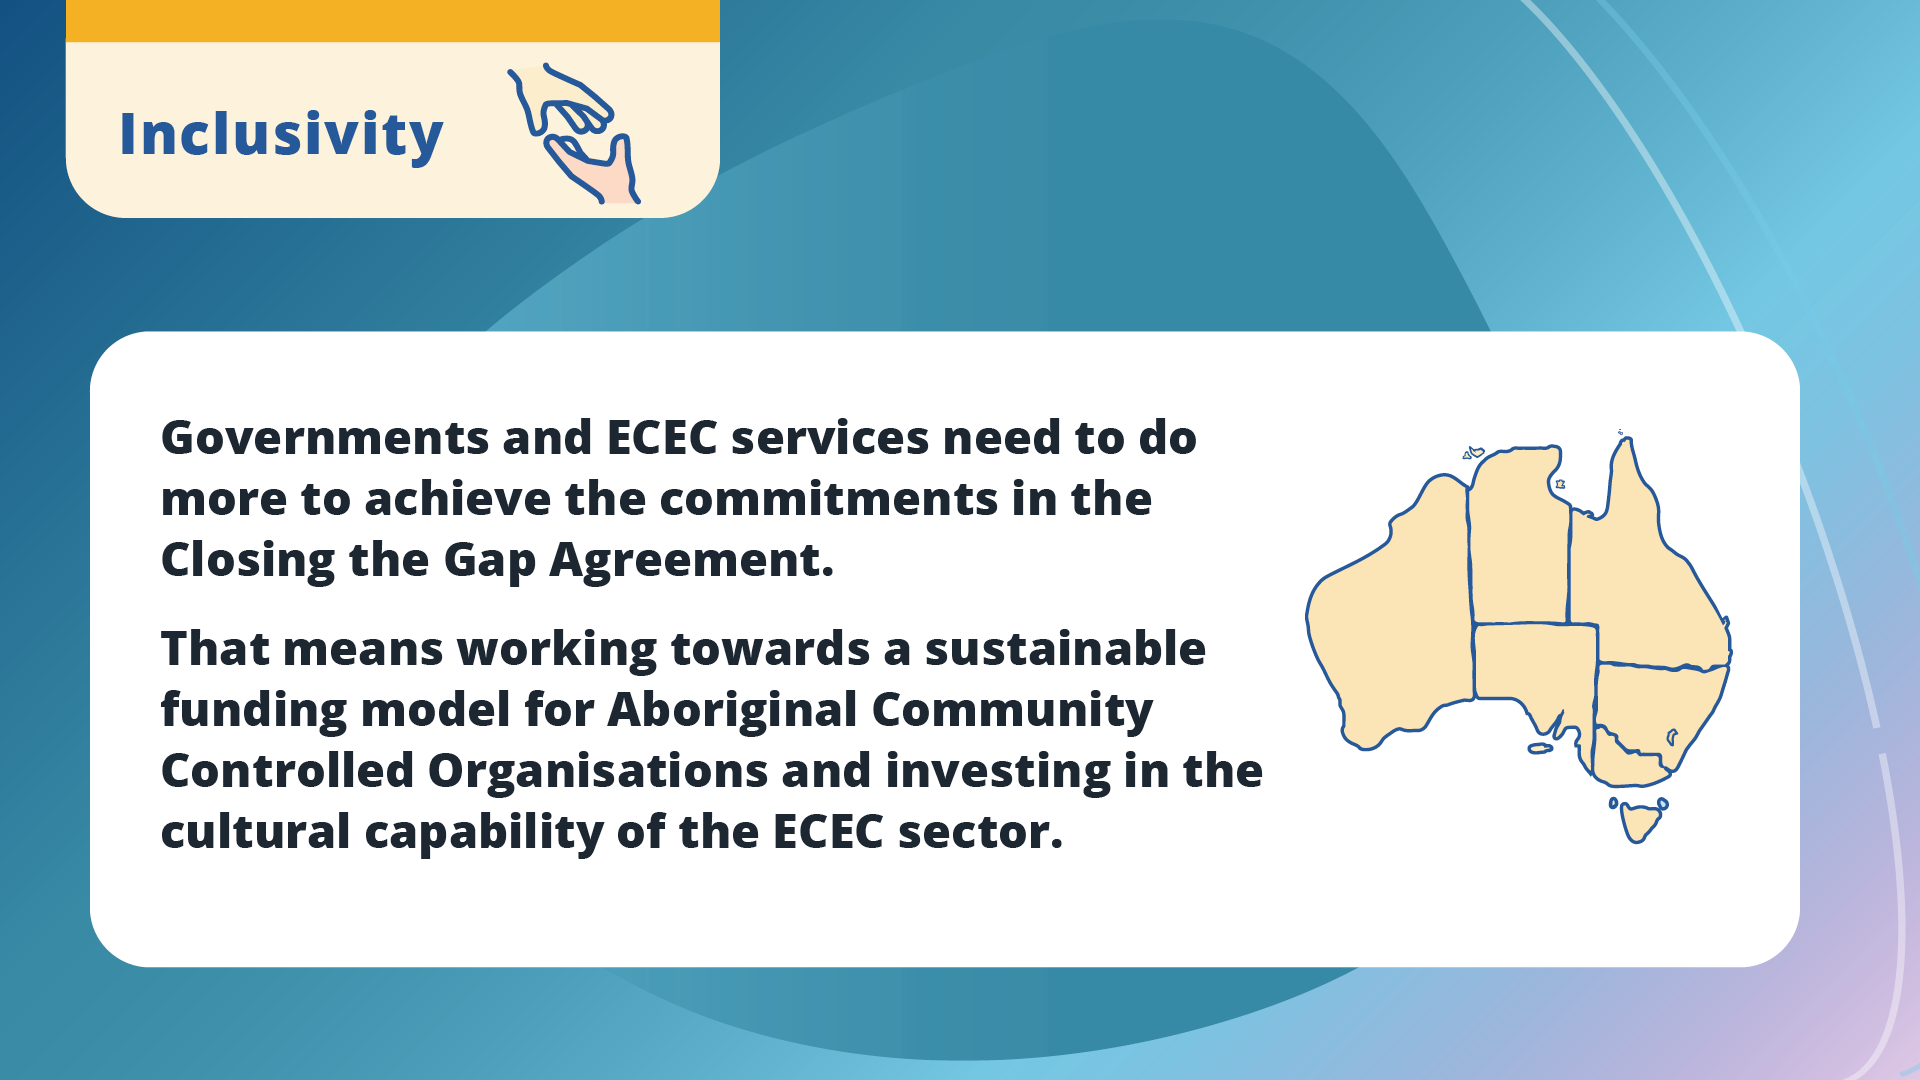 Governments and ECEC services need to do more to achieve the commitments in the Closing the Gap Agreement. That means working towards a sustainable funding model for Aboriginal Community Controlled Organisations and investing in the cultural capability of the ECEC sector.